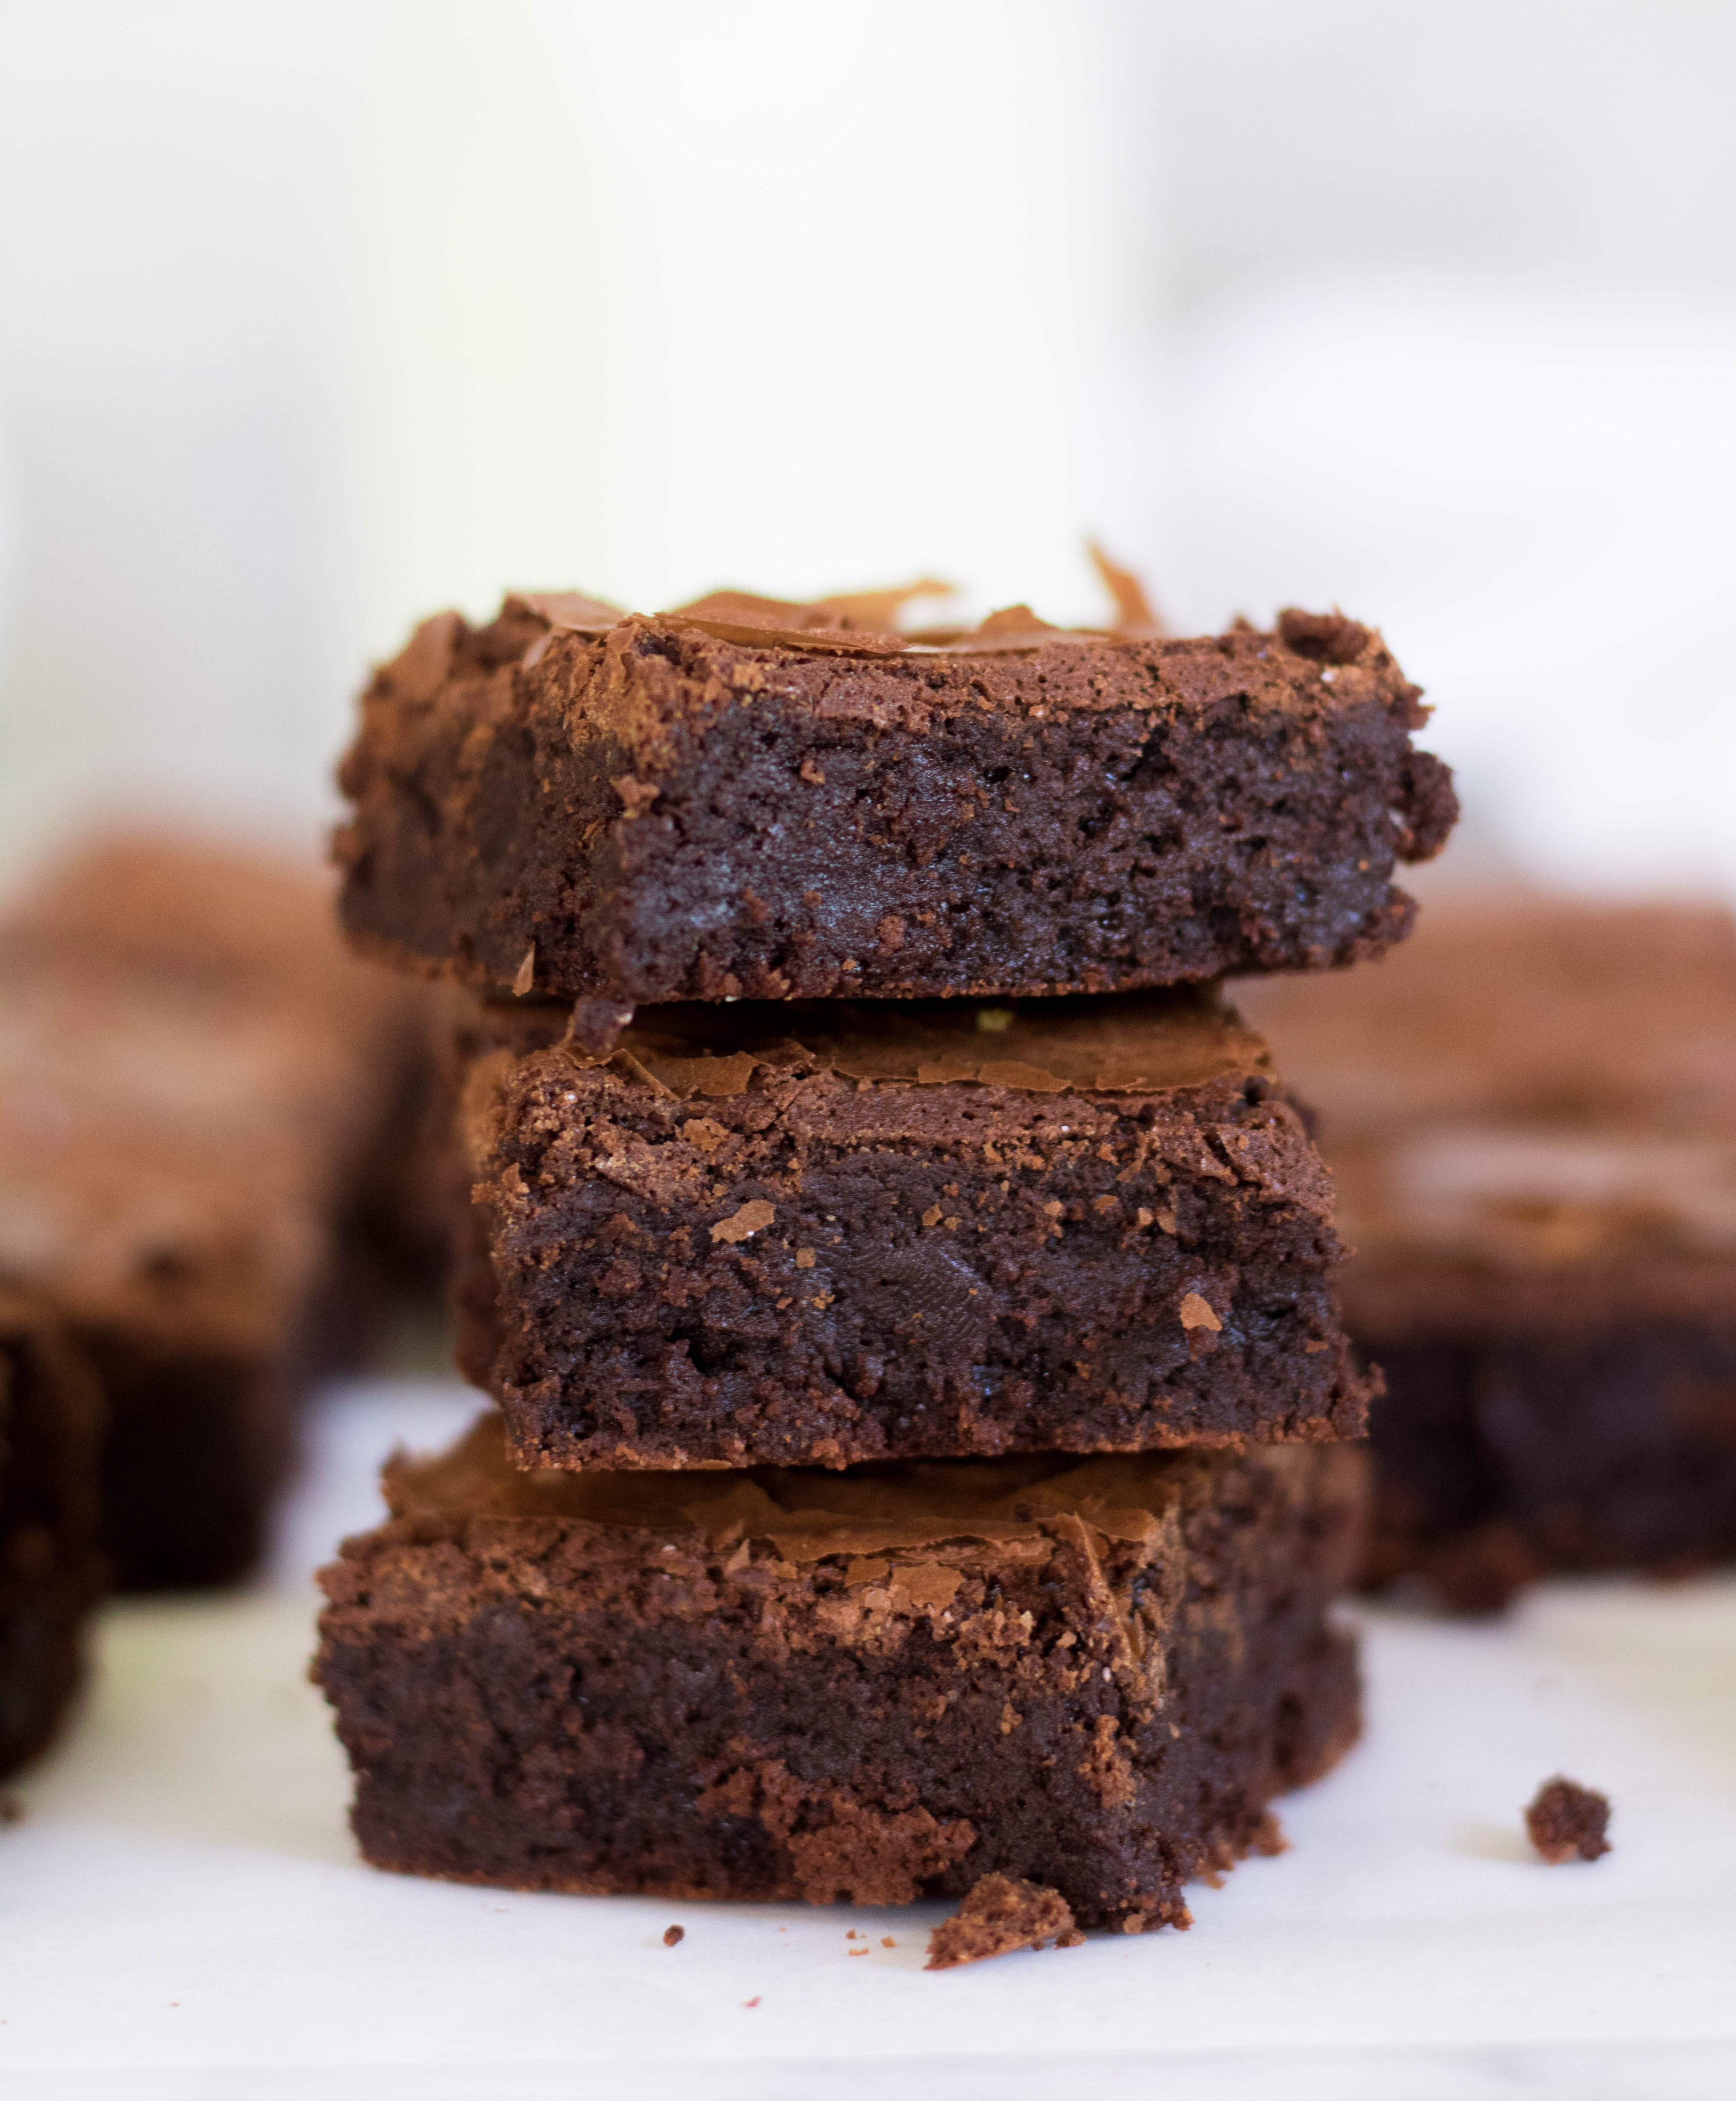 Bakery style brownies with no cocoa powder